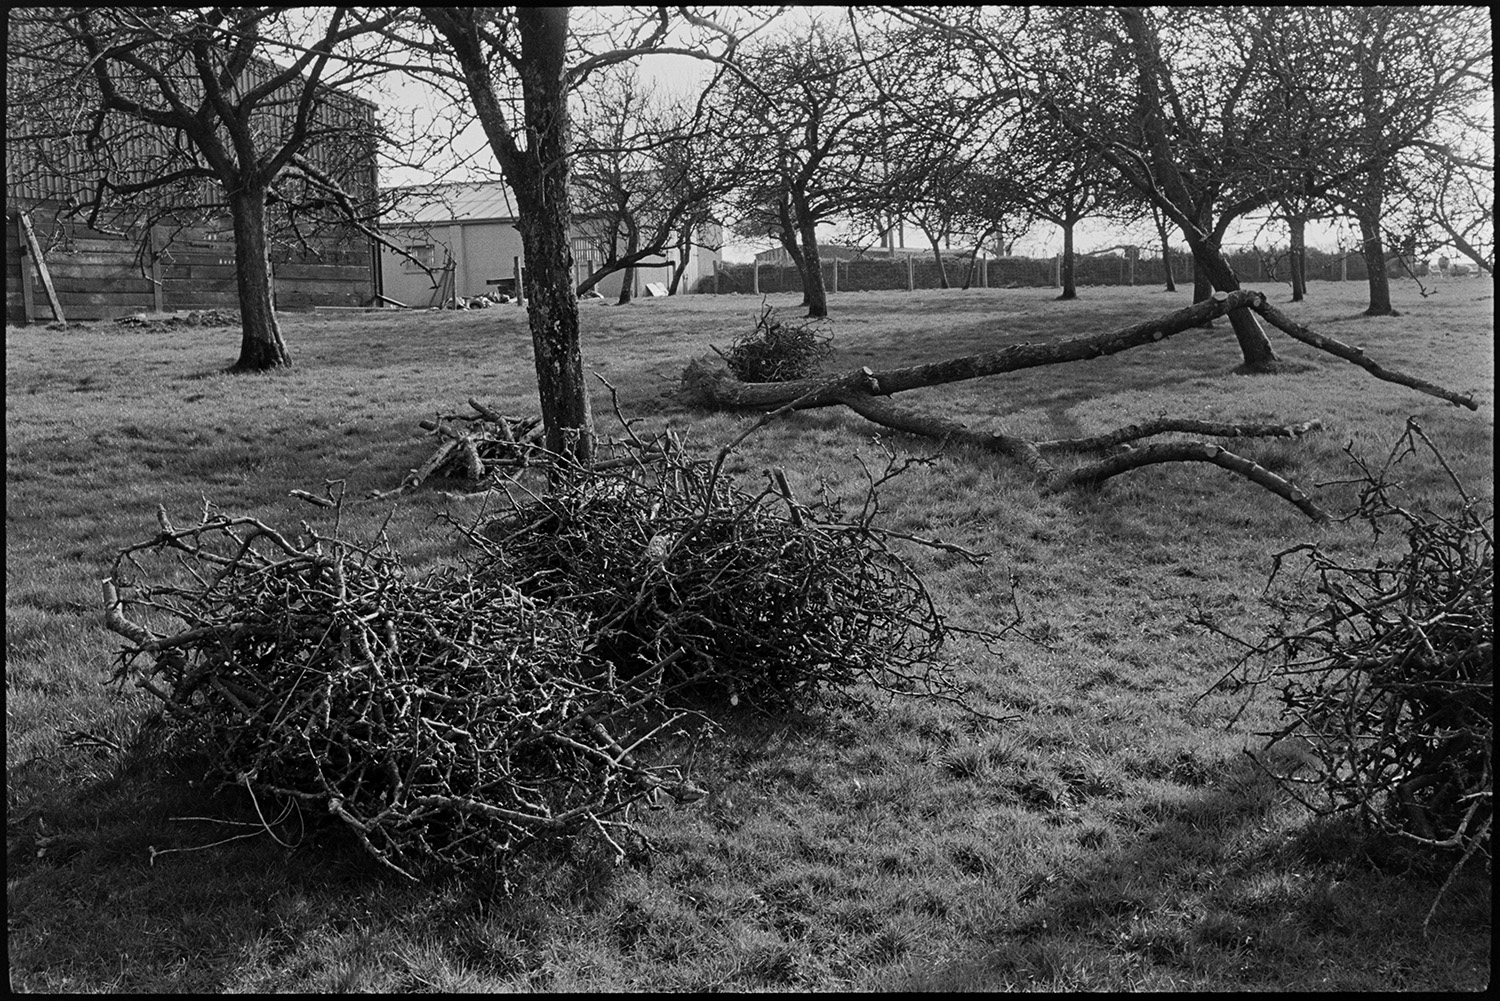 Orchard with prunings.
[A pile of prunings in an apple orchard at Warkleigh, near Satterleigh. There is a fallen apple tree and farm buildings in the background.]